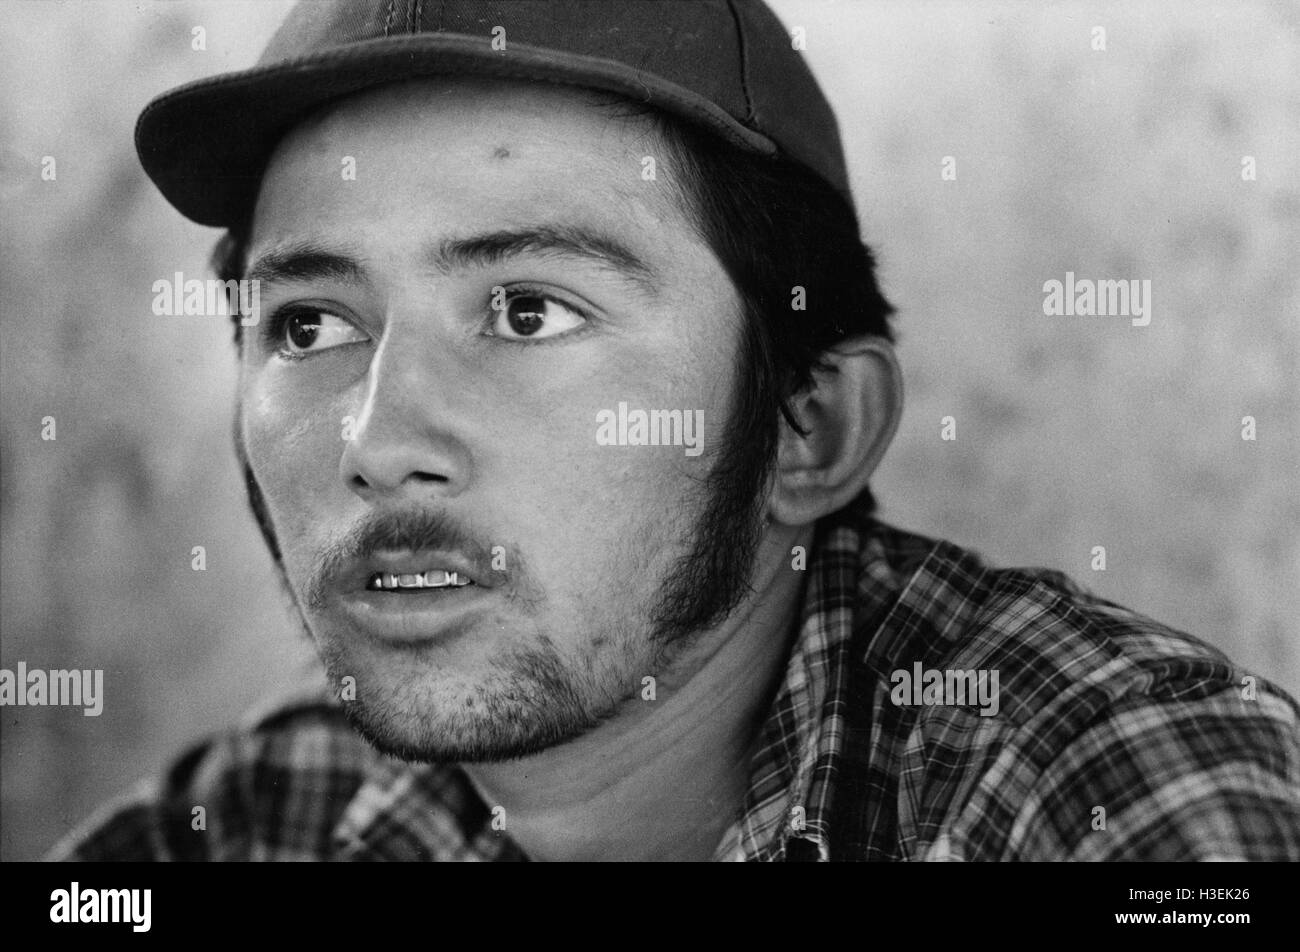 CHALATENANGO,  EL SALVADOR, FEB 1984: - Within the FPL Guerrilla's Zones of Control - A member of the PPL (Local Popular Powers) elected to work with the adminstration of the guerrilla-held area. Stock Photo